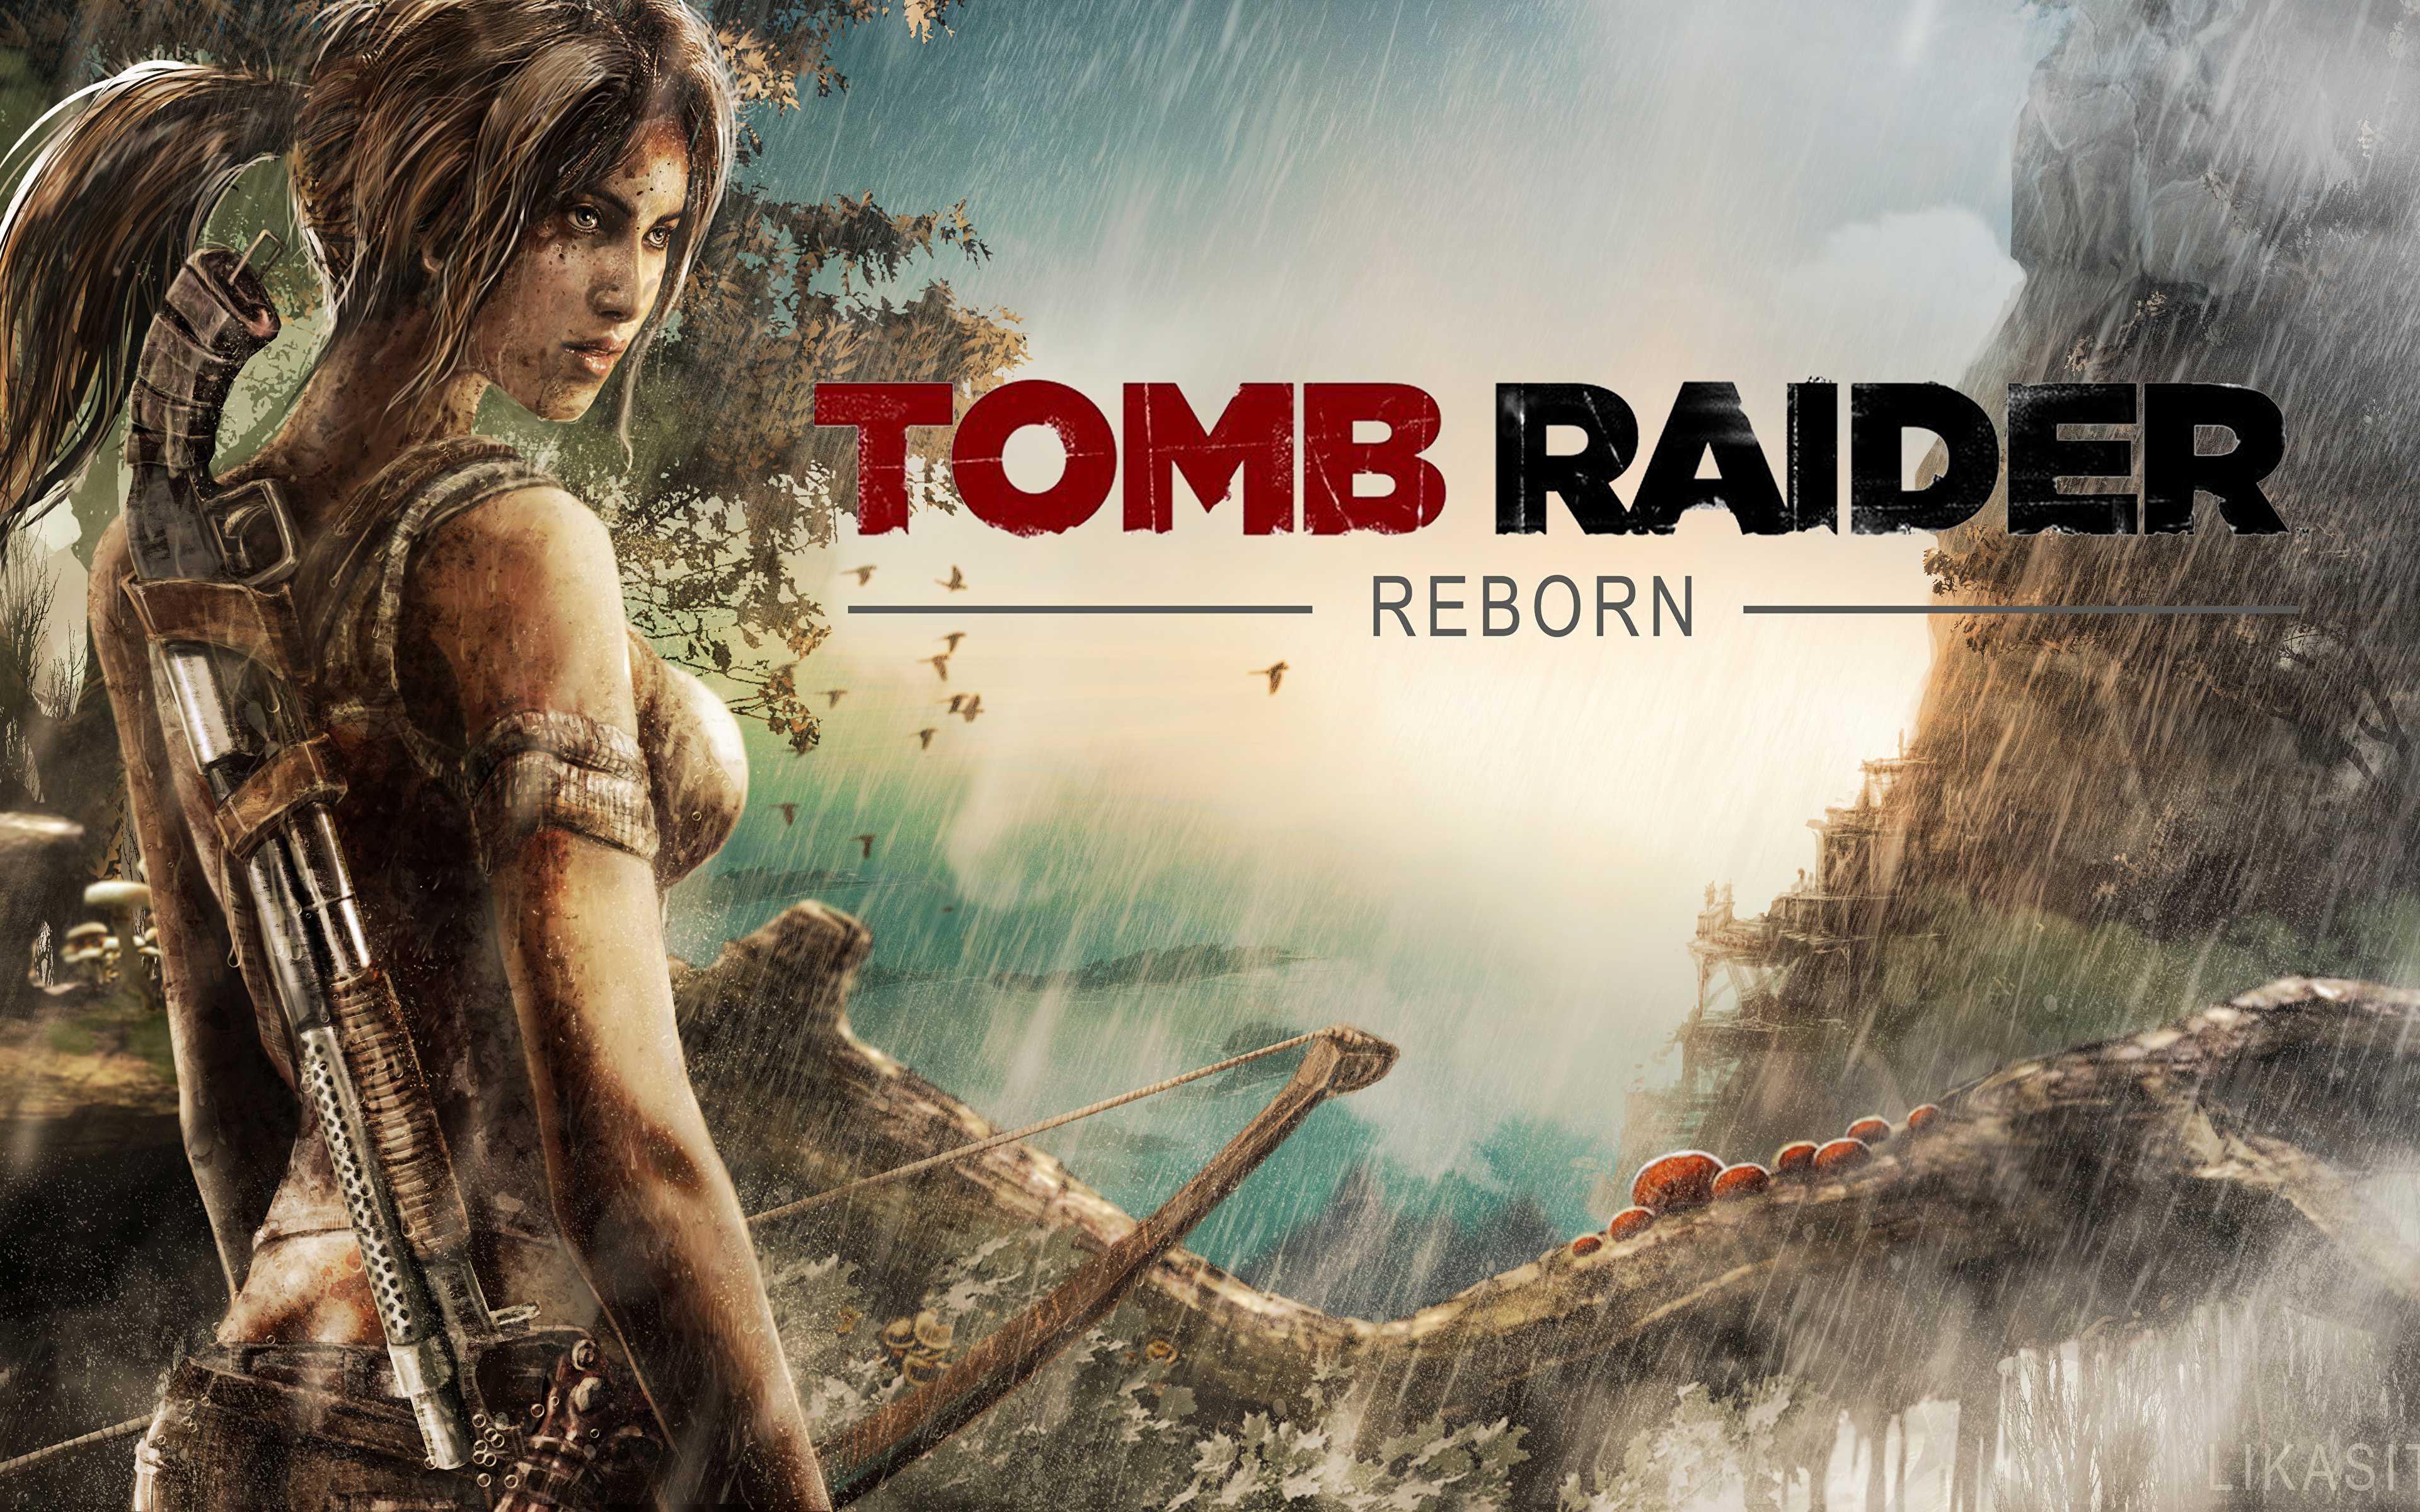 Tomb raider in steam фото 112